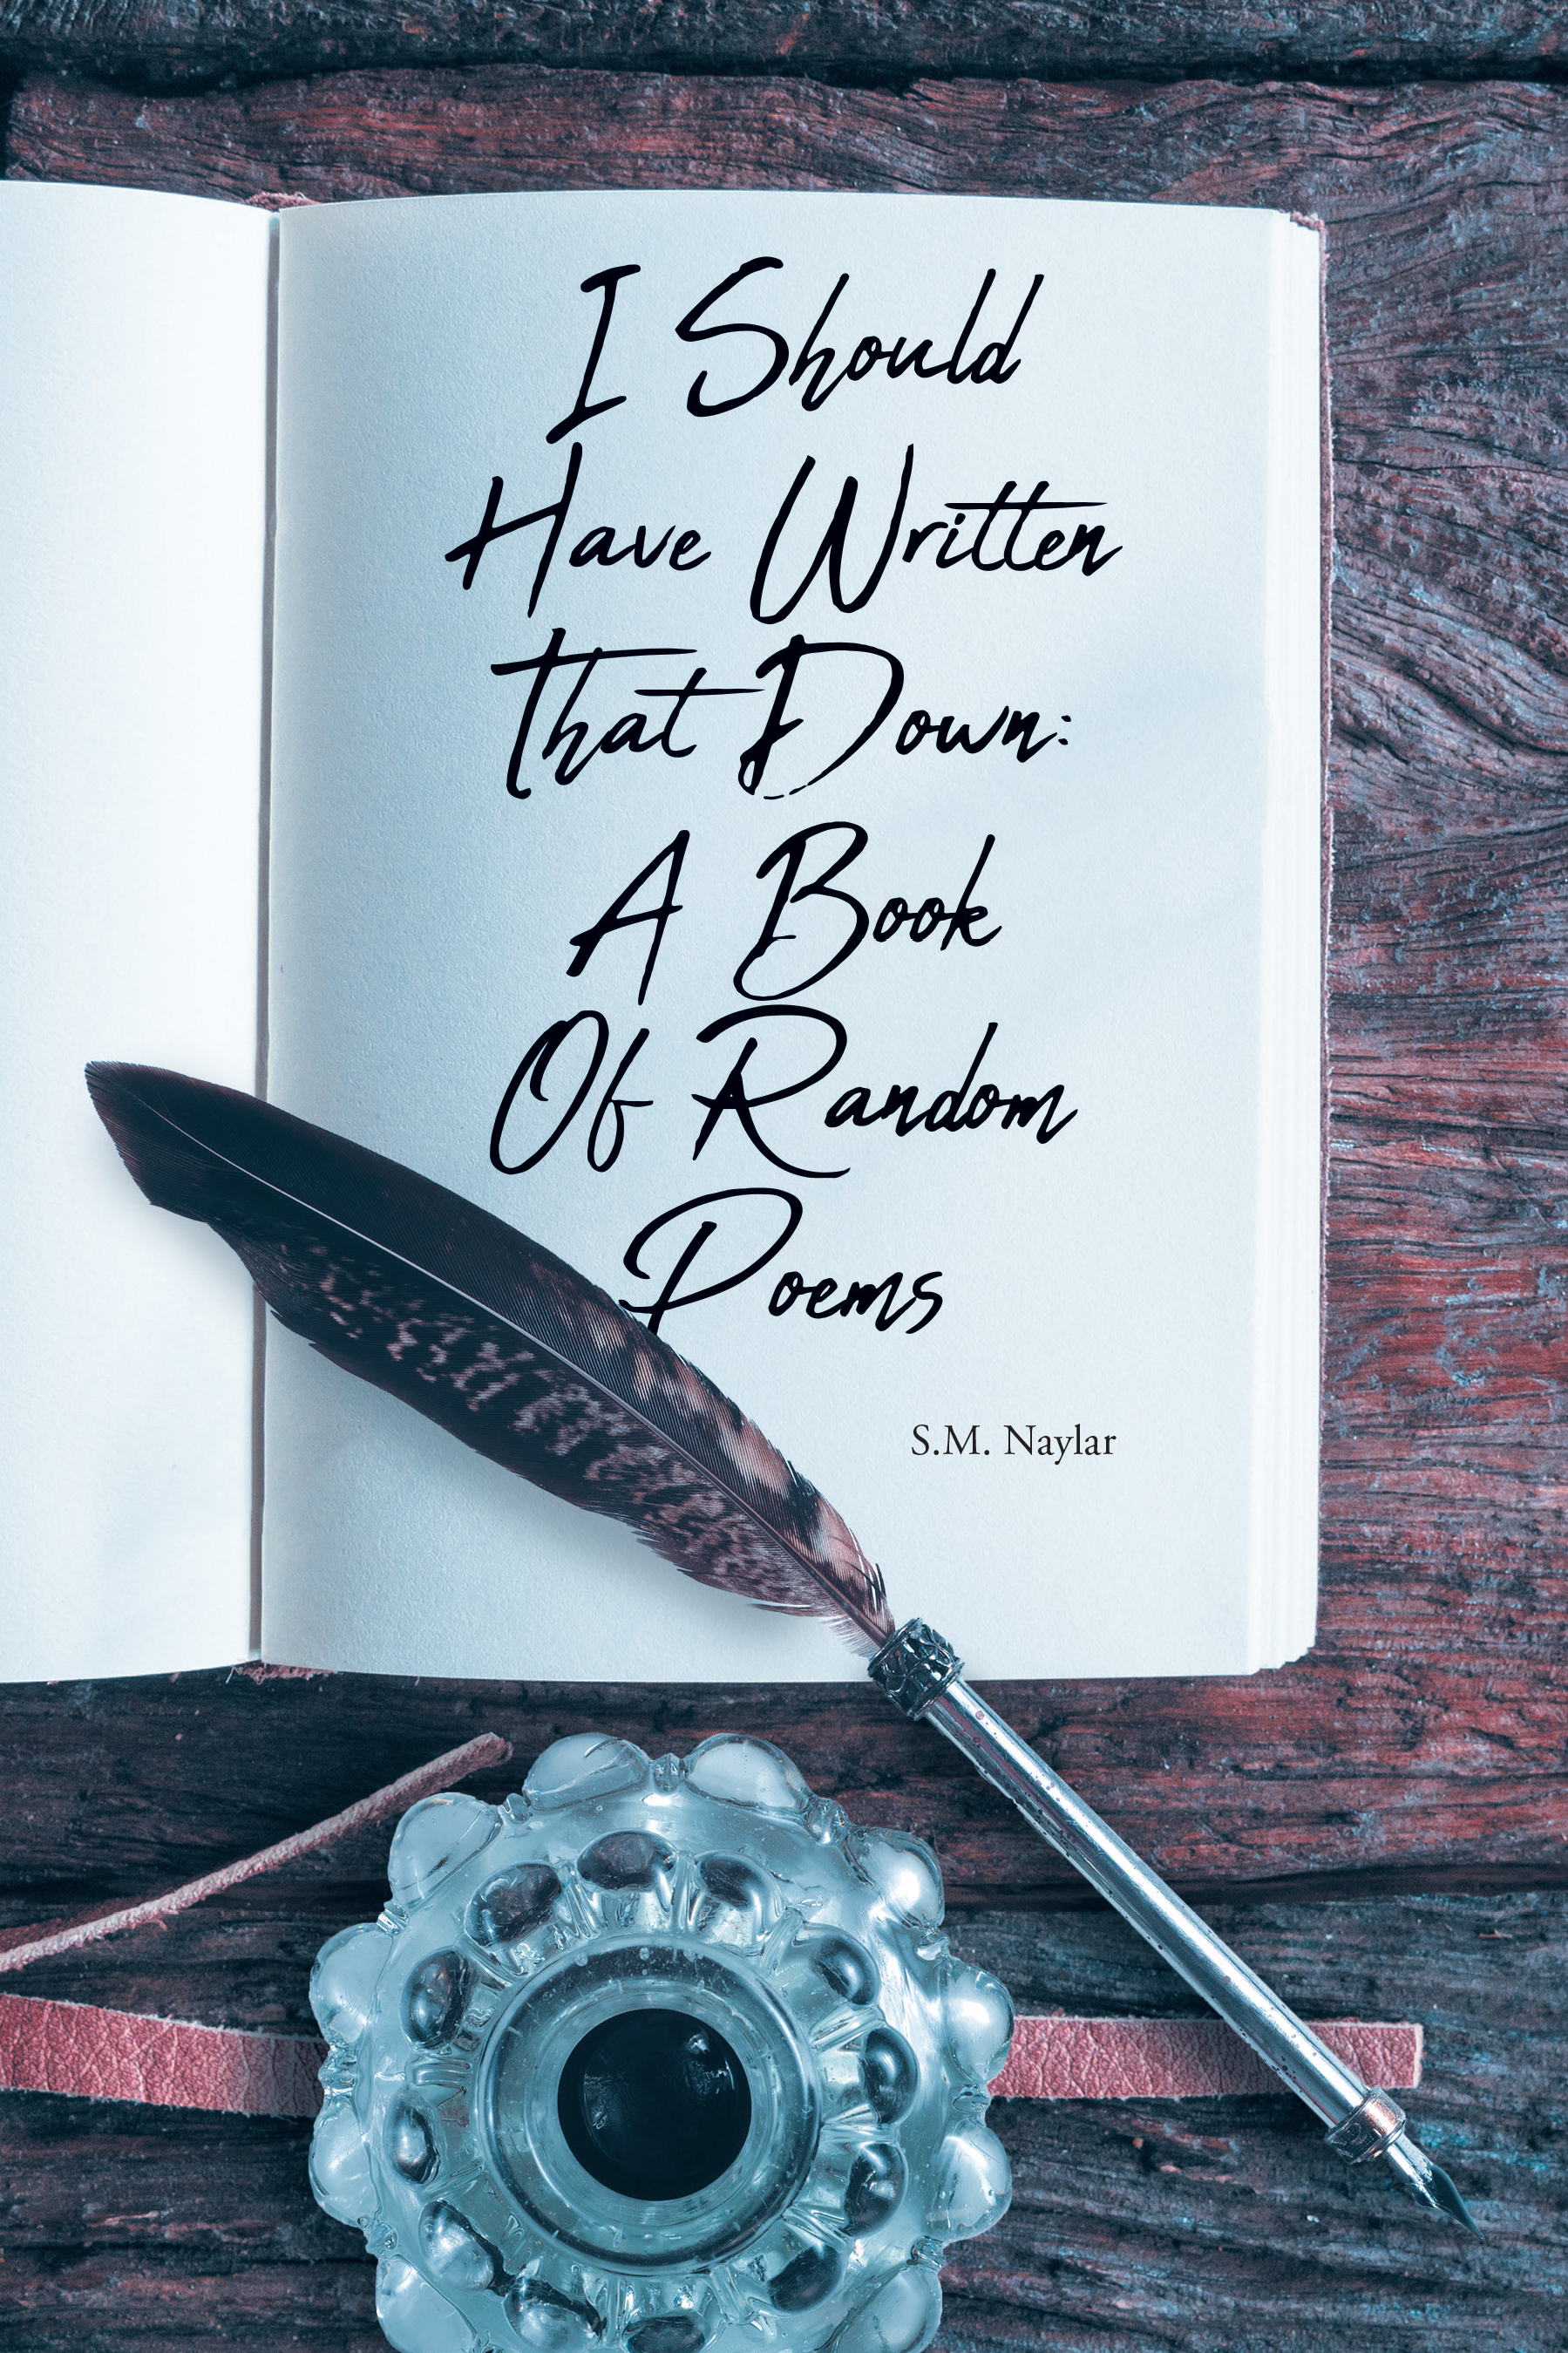 S.M. Naylar’s New Book, “I Should Have Written That Down: A Book of Random Poems,” Presents a Captivating and Emotionally Stirring Series of Poetry and Ruminations